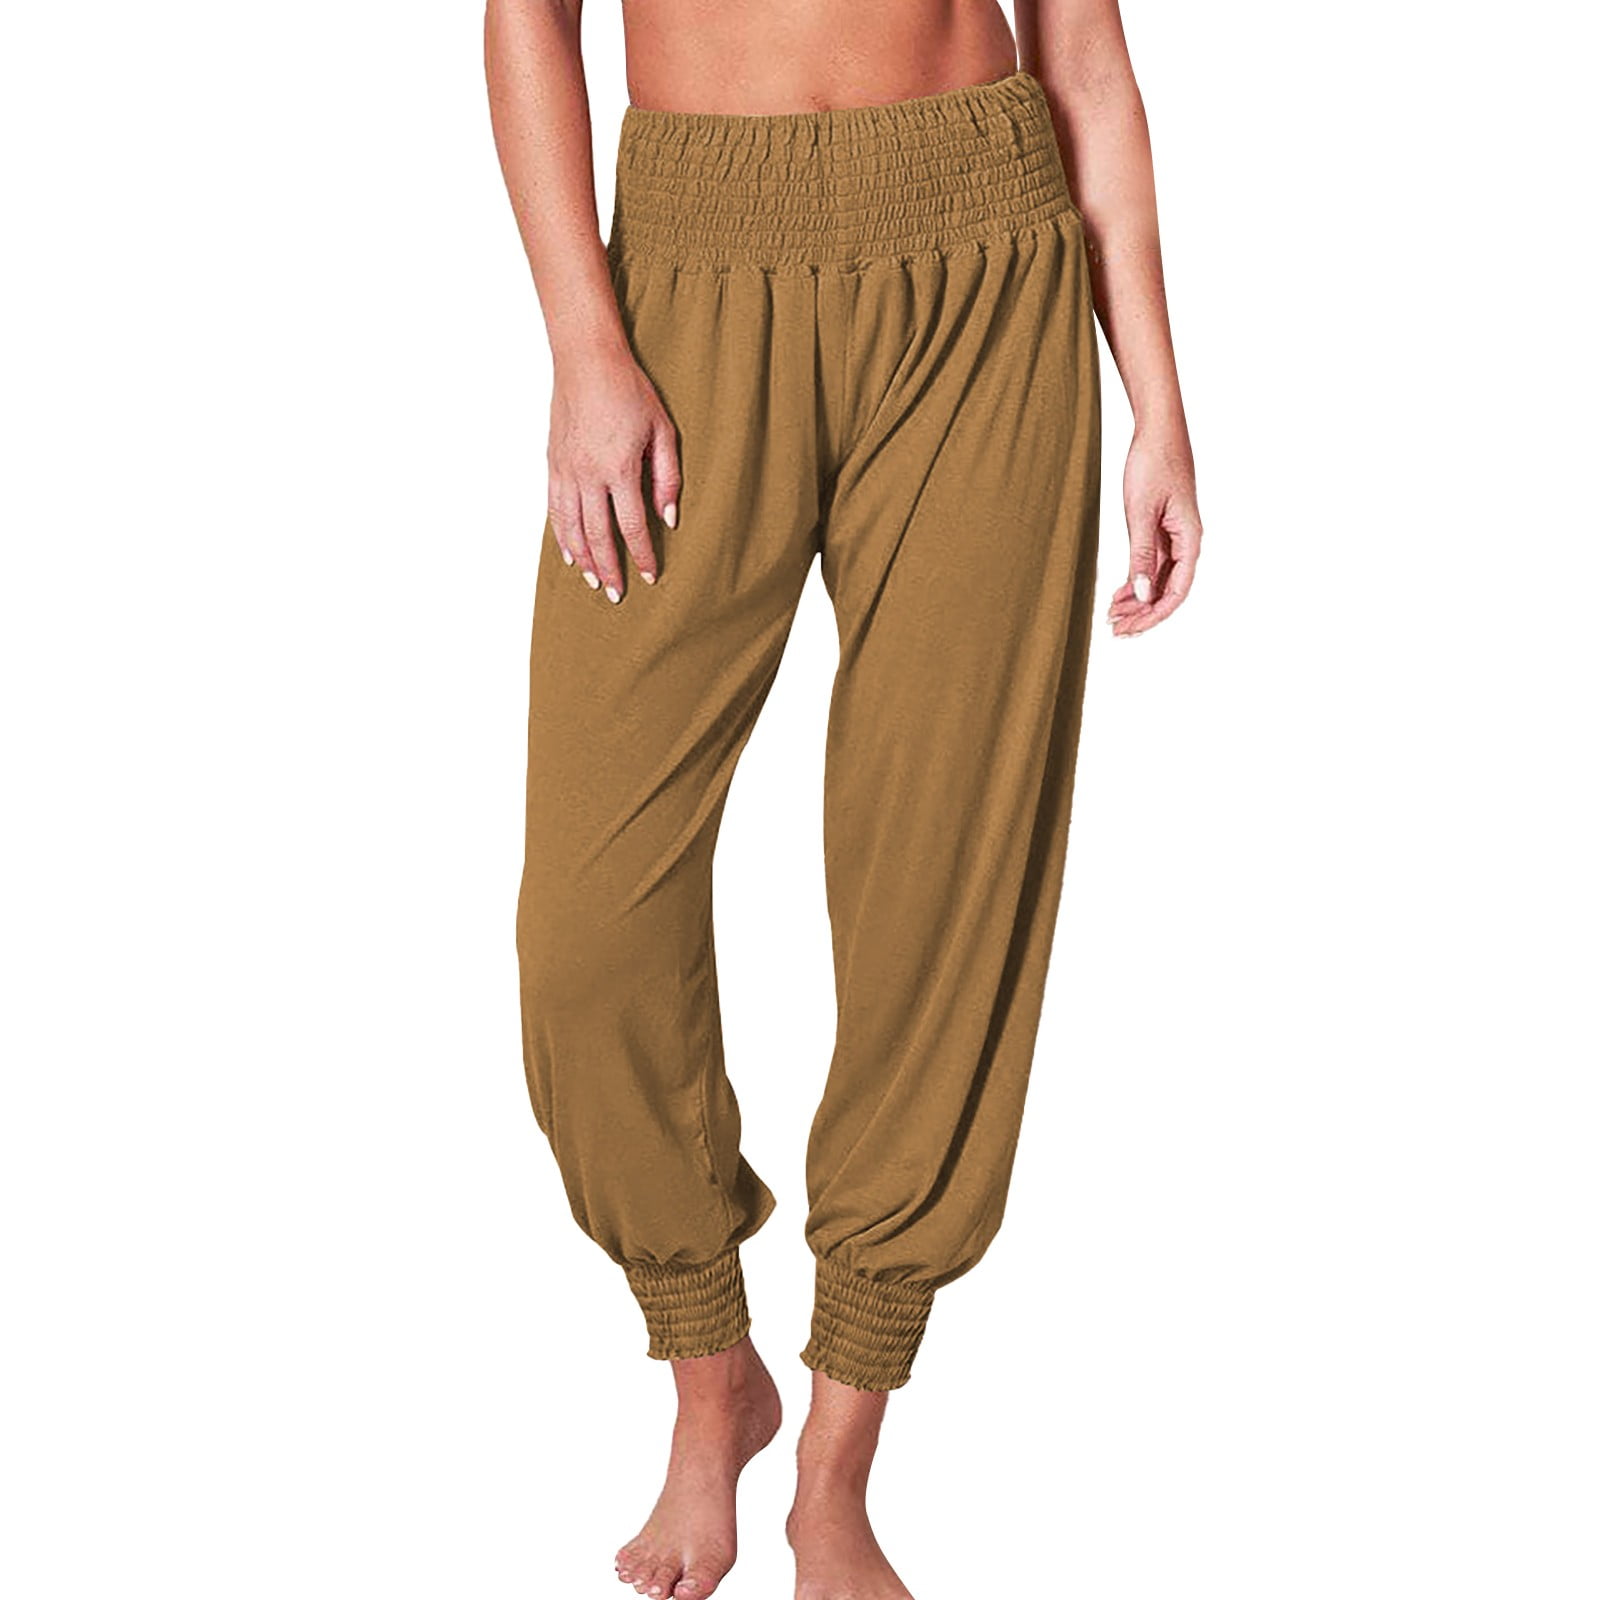 NECHOLOGY Cargo Work Pants Women's Ease into Comfort Stretch Slim Pant  Coffee Large 